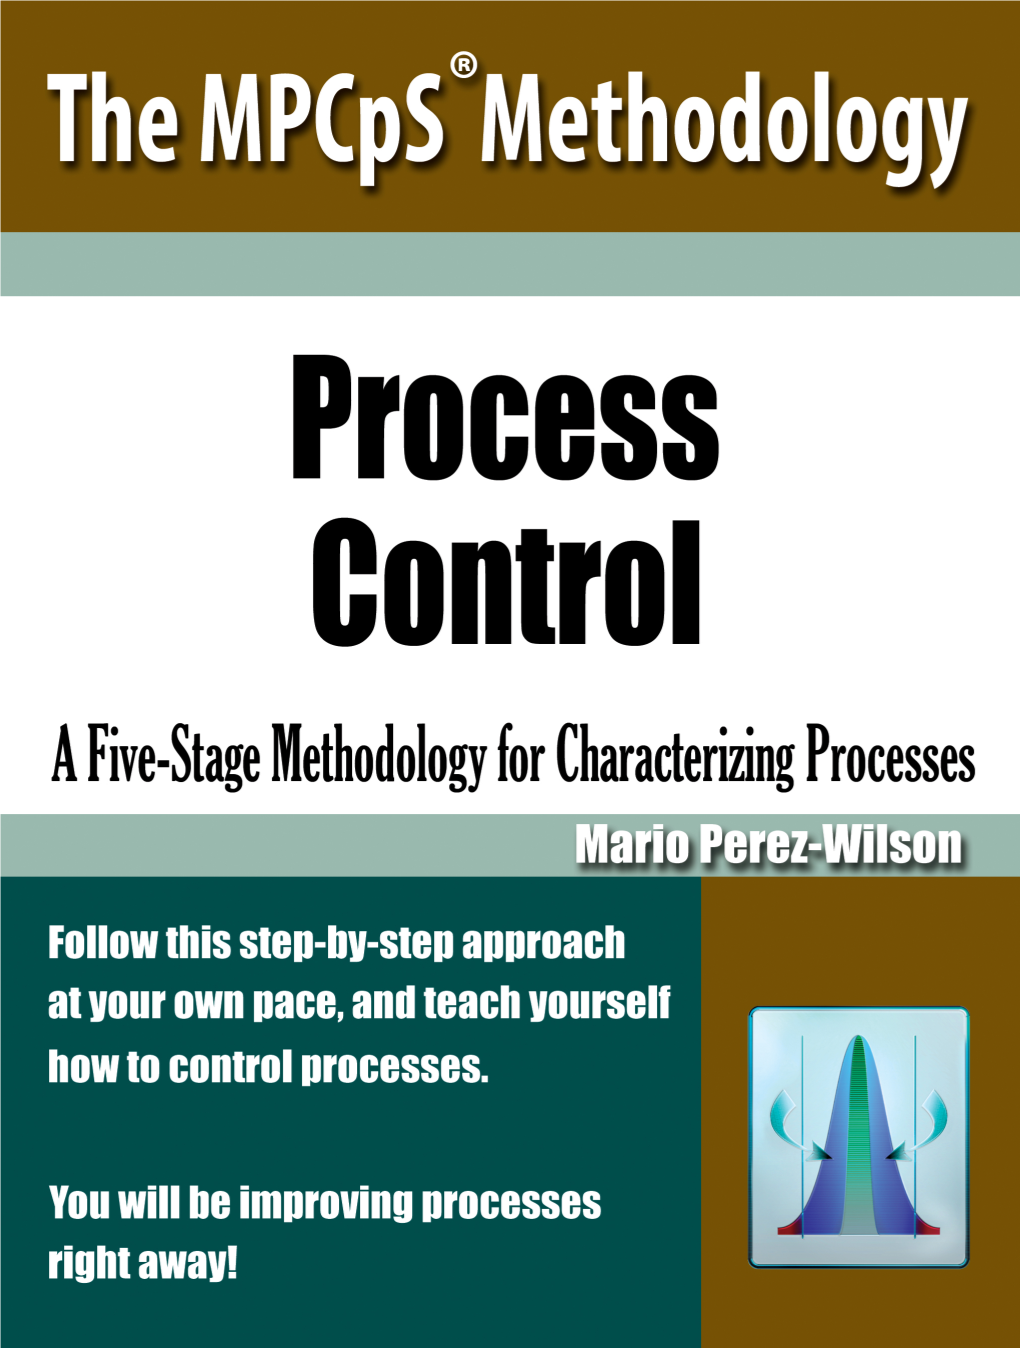 Process Control -A Preventive Approach for Total Control During Production